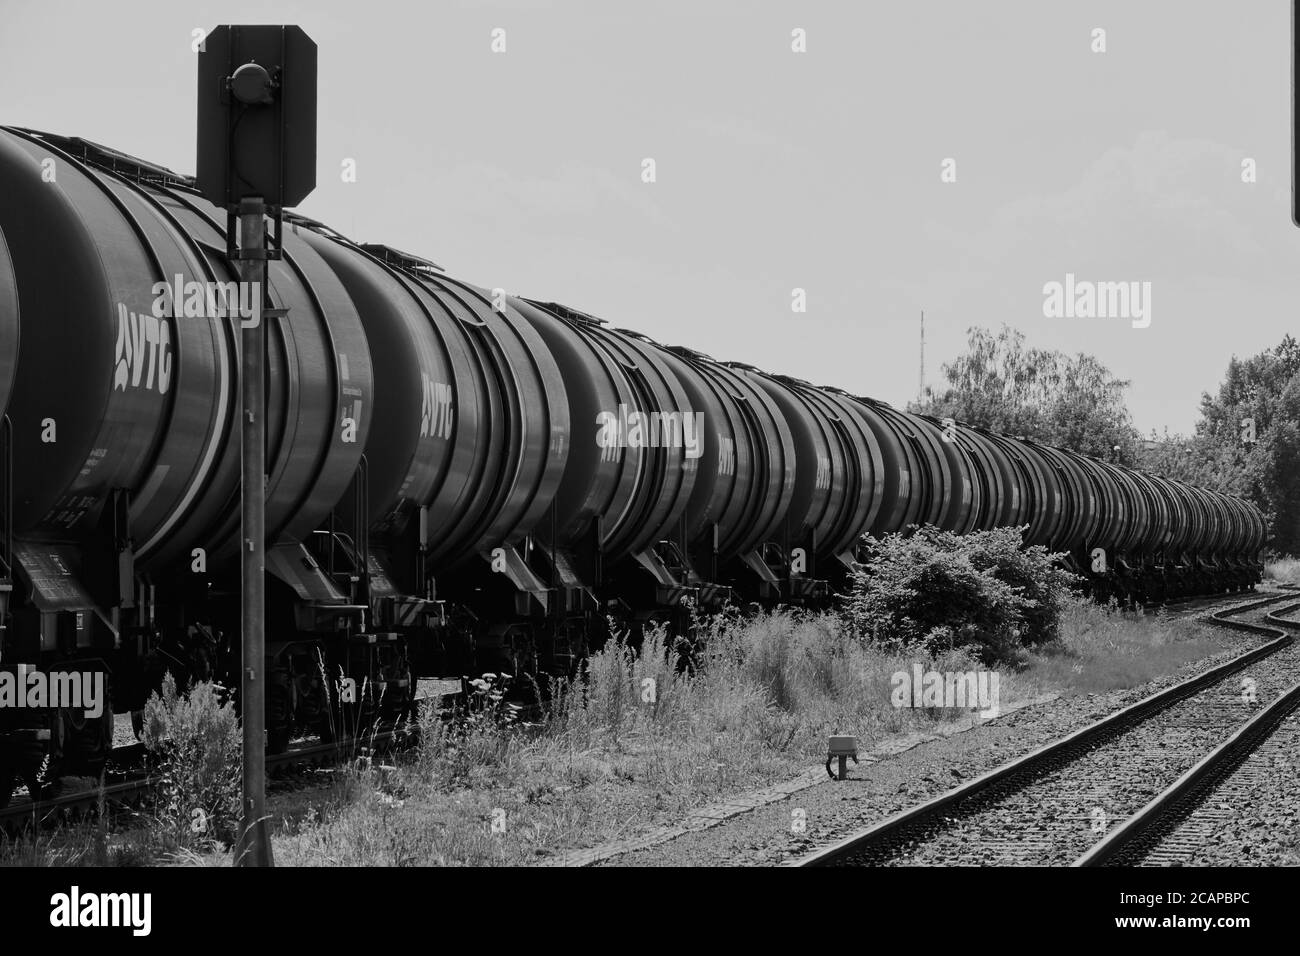 Magdeburg, Germany, June 27., 2020: Long train with tank wagons behind each other in a row on a track next to empty rails, black and white Stock Photo